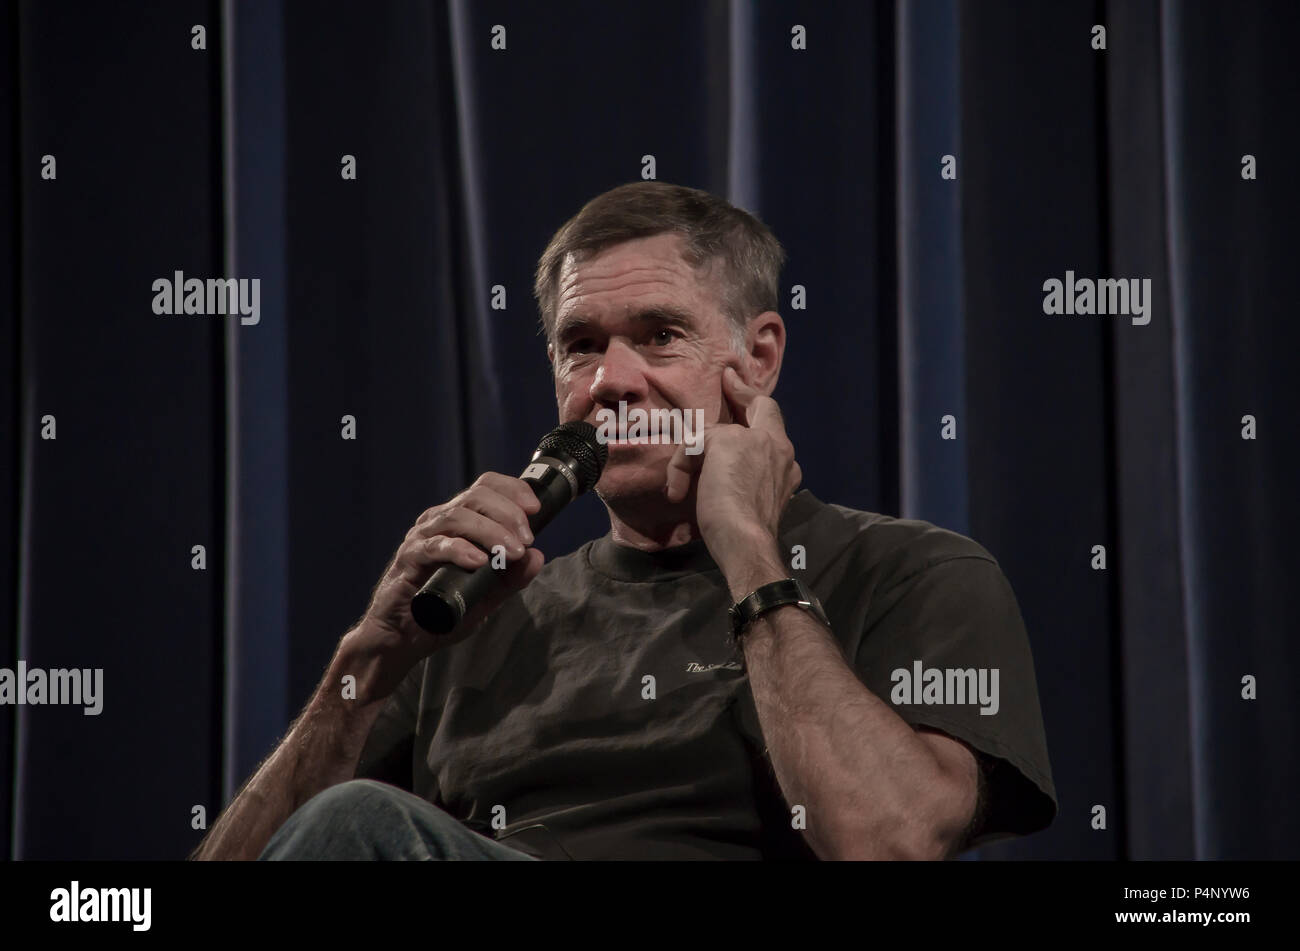 Madrid, Spain. 22nd June 2018. Film director Gus Van Sant, who is visiting Madrid for the premiere of his latest movie “Don’t Worry, He Won’t Get Far on Foot”, gave a conference at the Spanish Film Archive after a projection of “Elephant” as part of a cicle about his filmography. Credit: Lora Grigorova/Alamy Live News Stock Photo